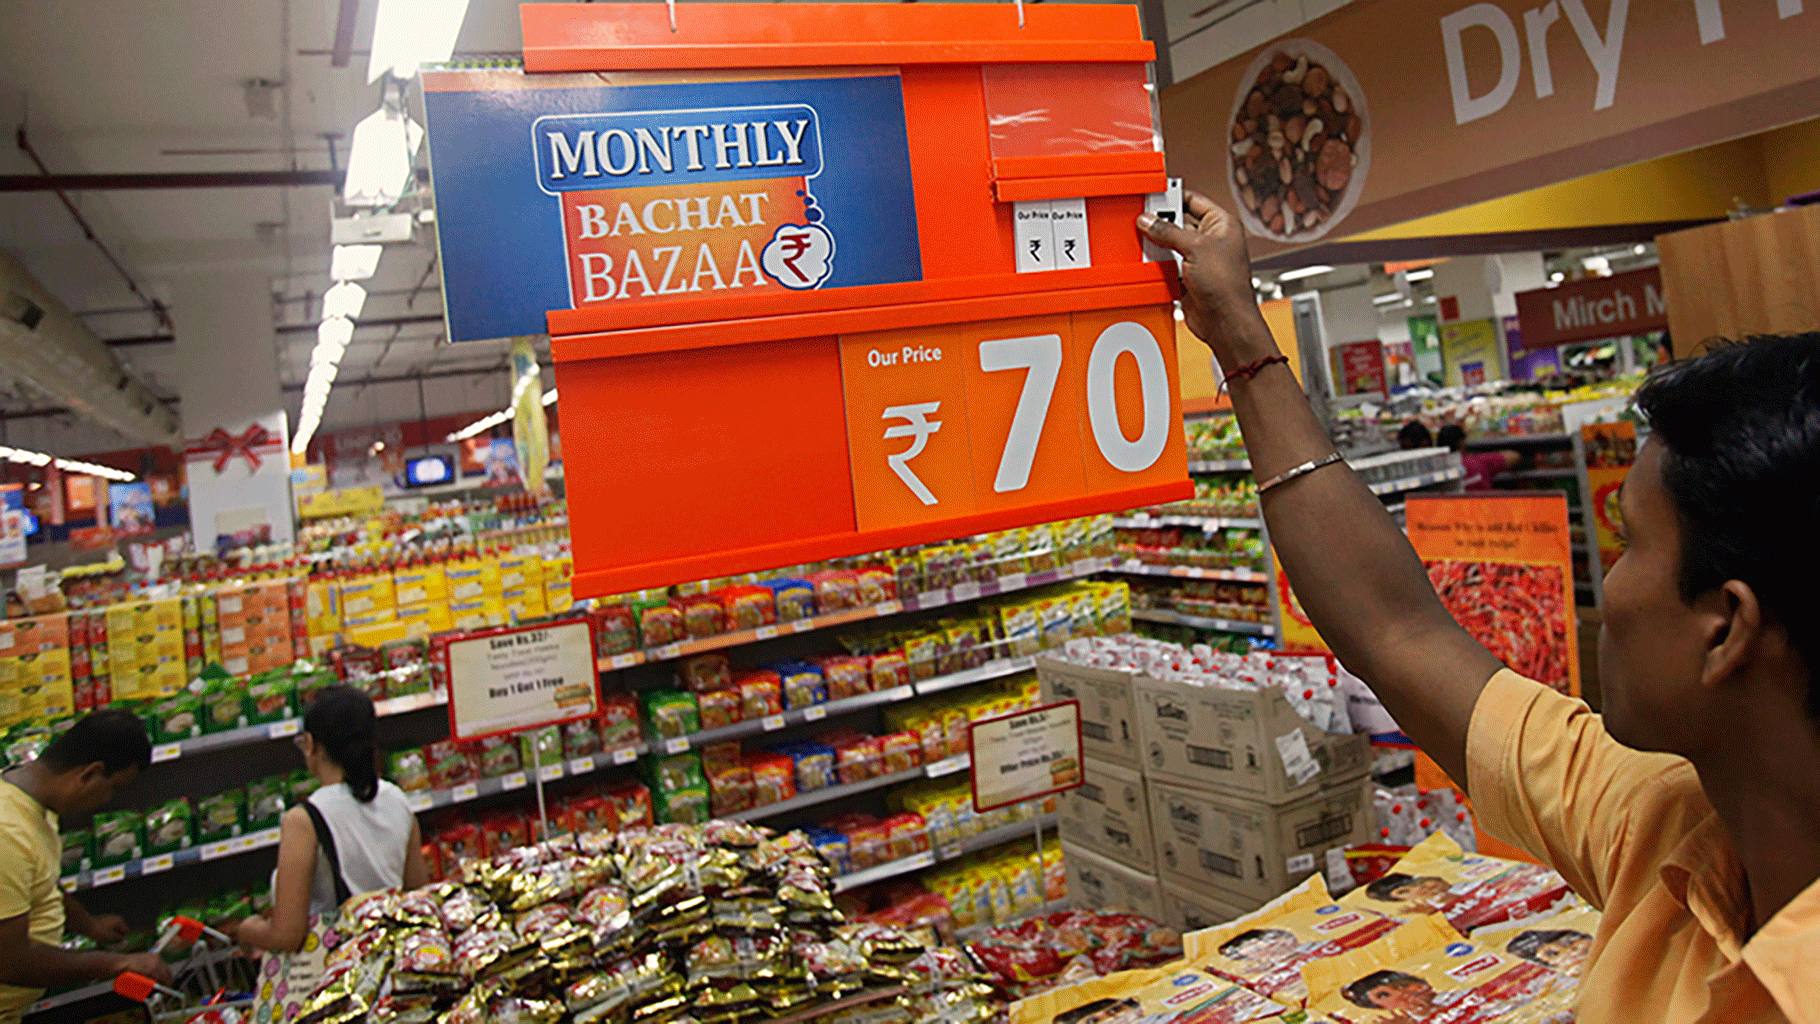 An employee changes the price tag of a product at the Big Bazaar retail store.